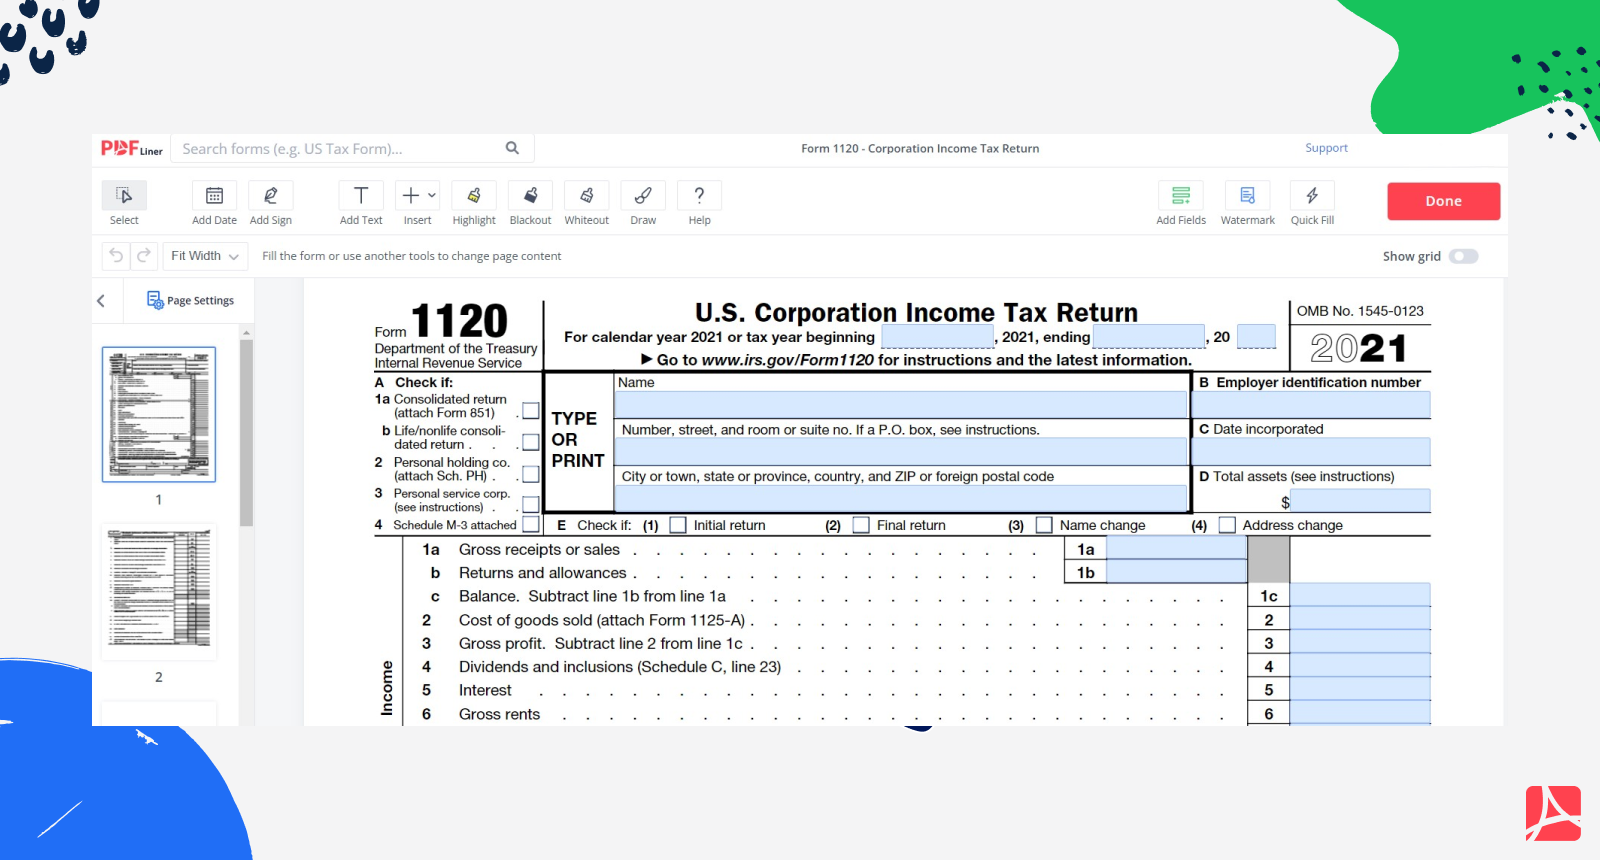 How to Fill Out Tax Form 1120